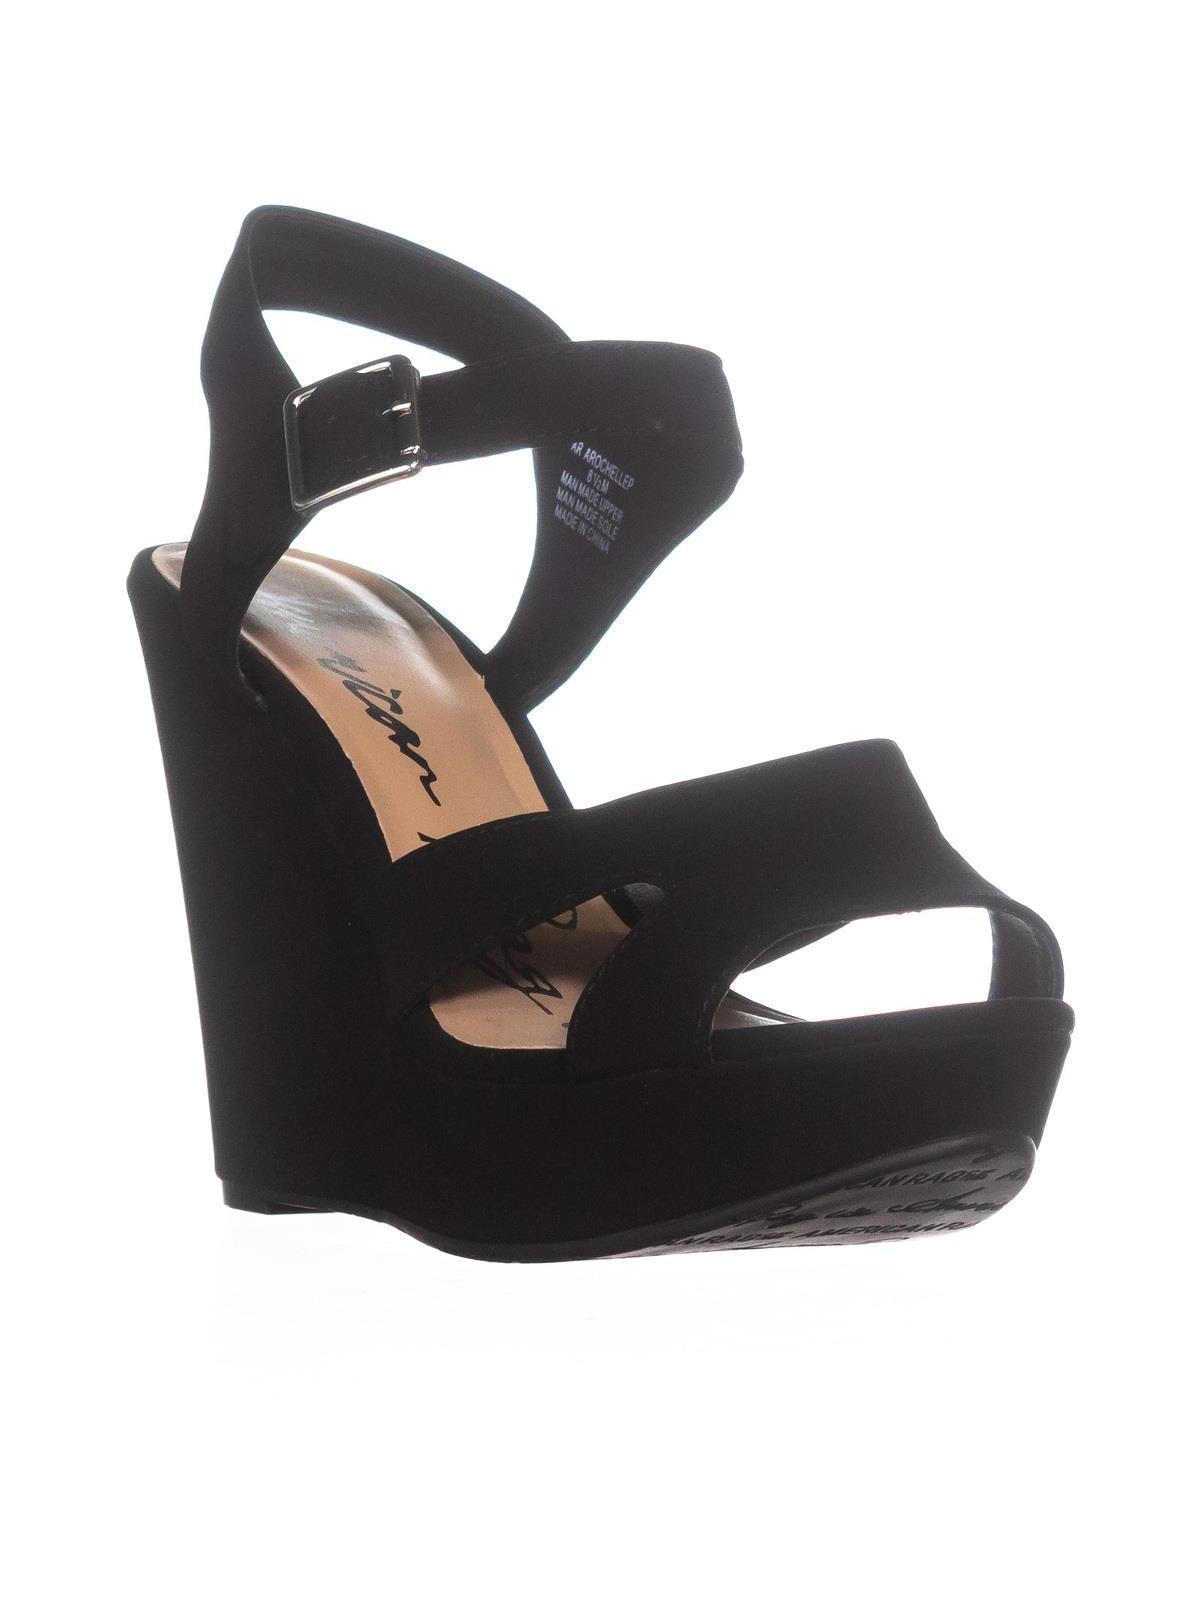 Womens AR35 Rochelle Ankle Strap Wedge Sandals, Black - image 1 of 5